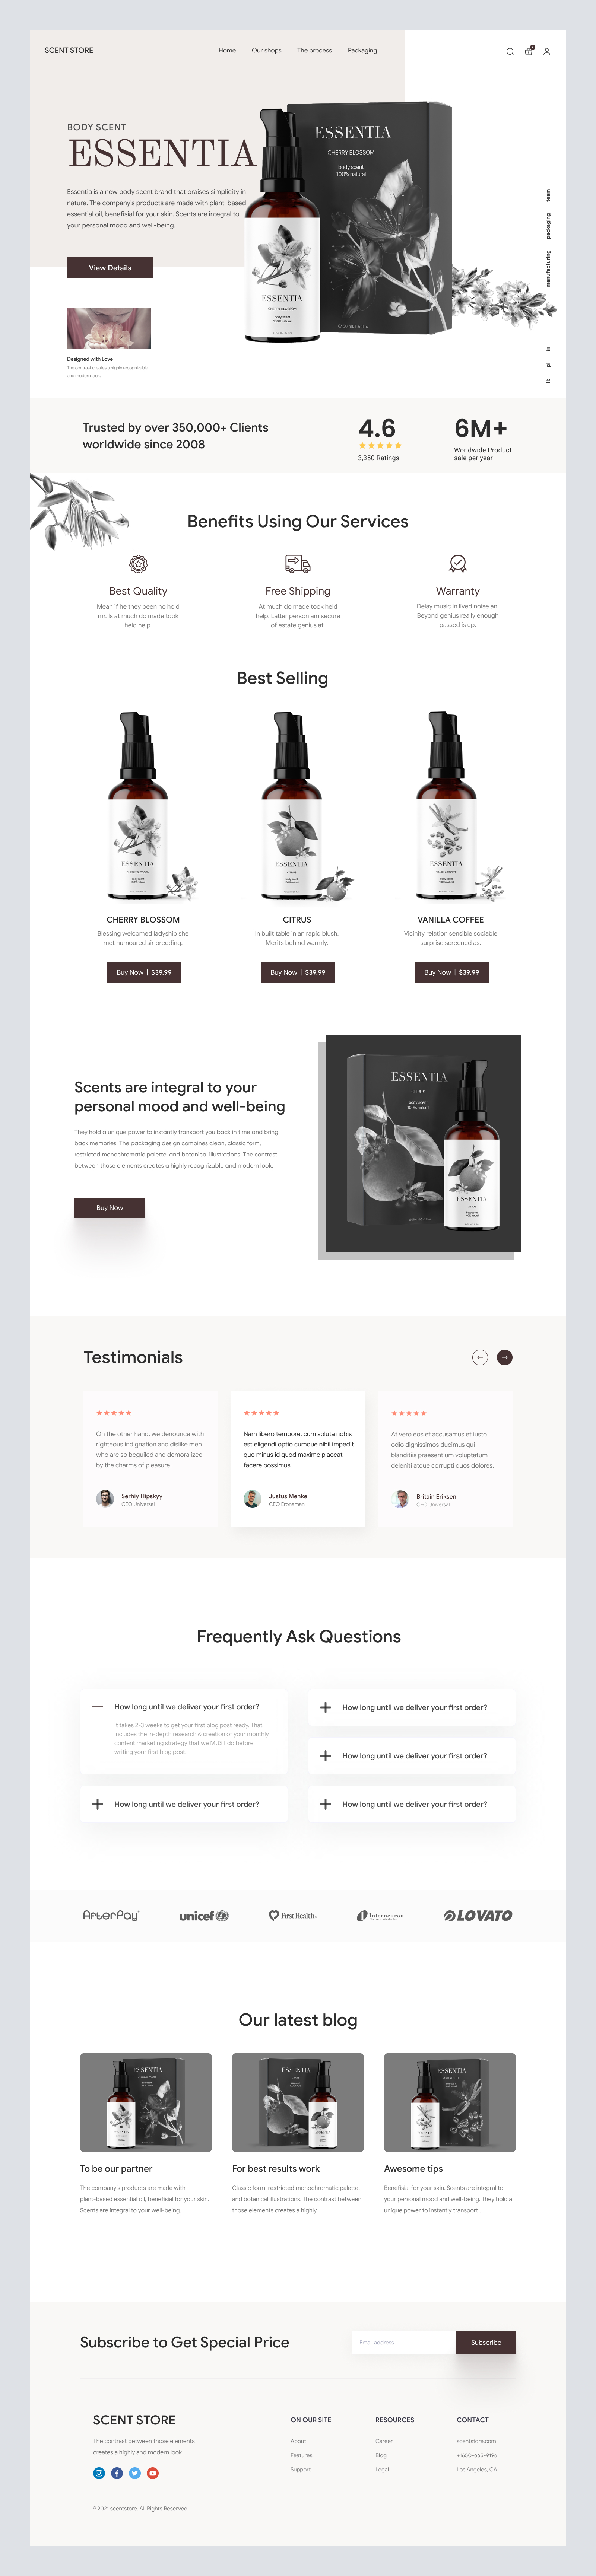 Shopify website design by Mike Taylor for Shopified on Dribbble